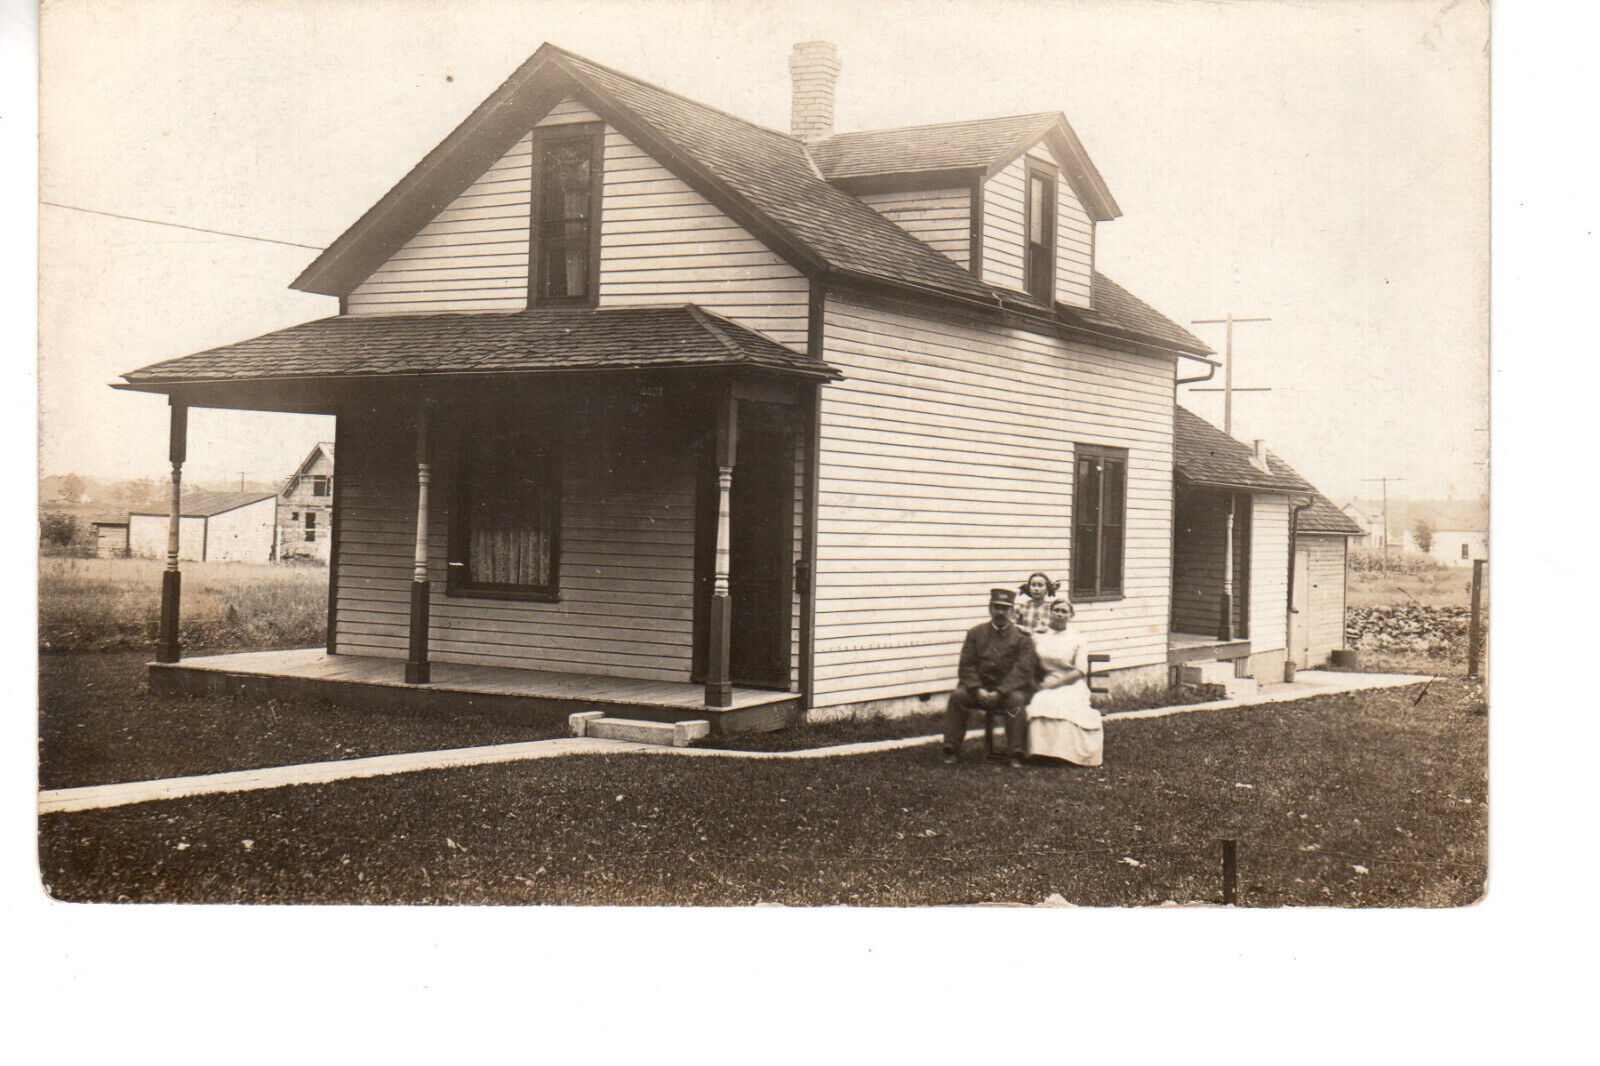 RPPC Postcard: Clapboard house; family - man wearing conductor RR-style hat